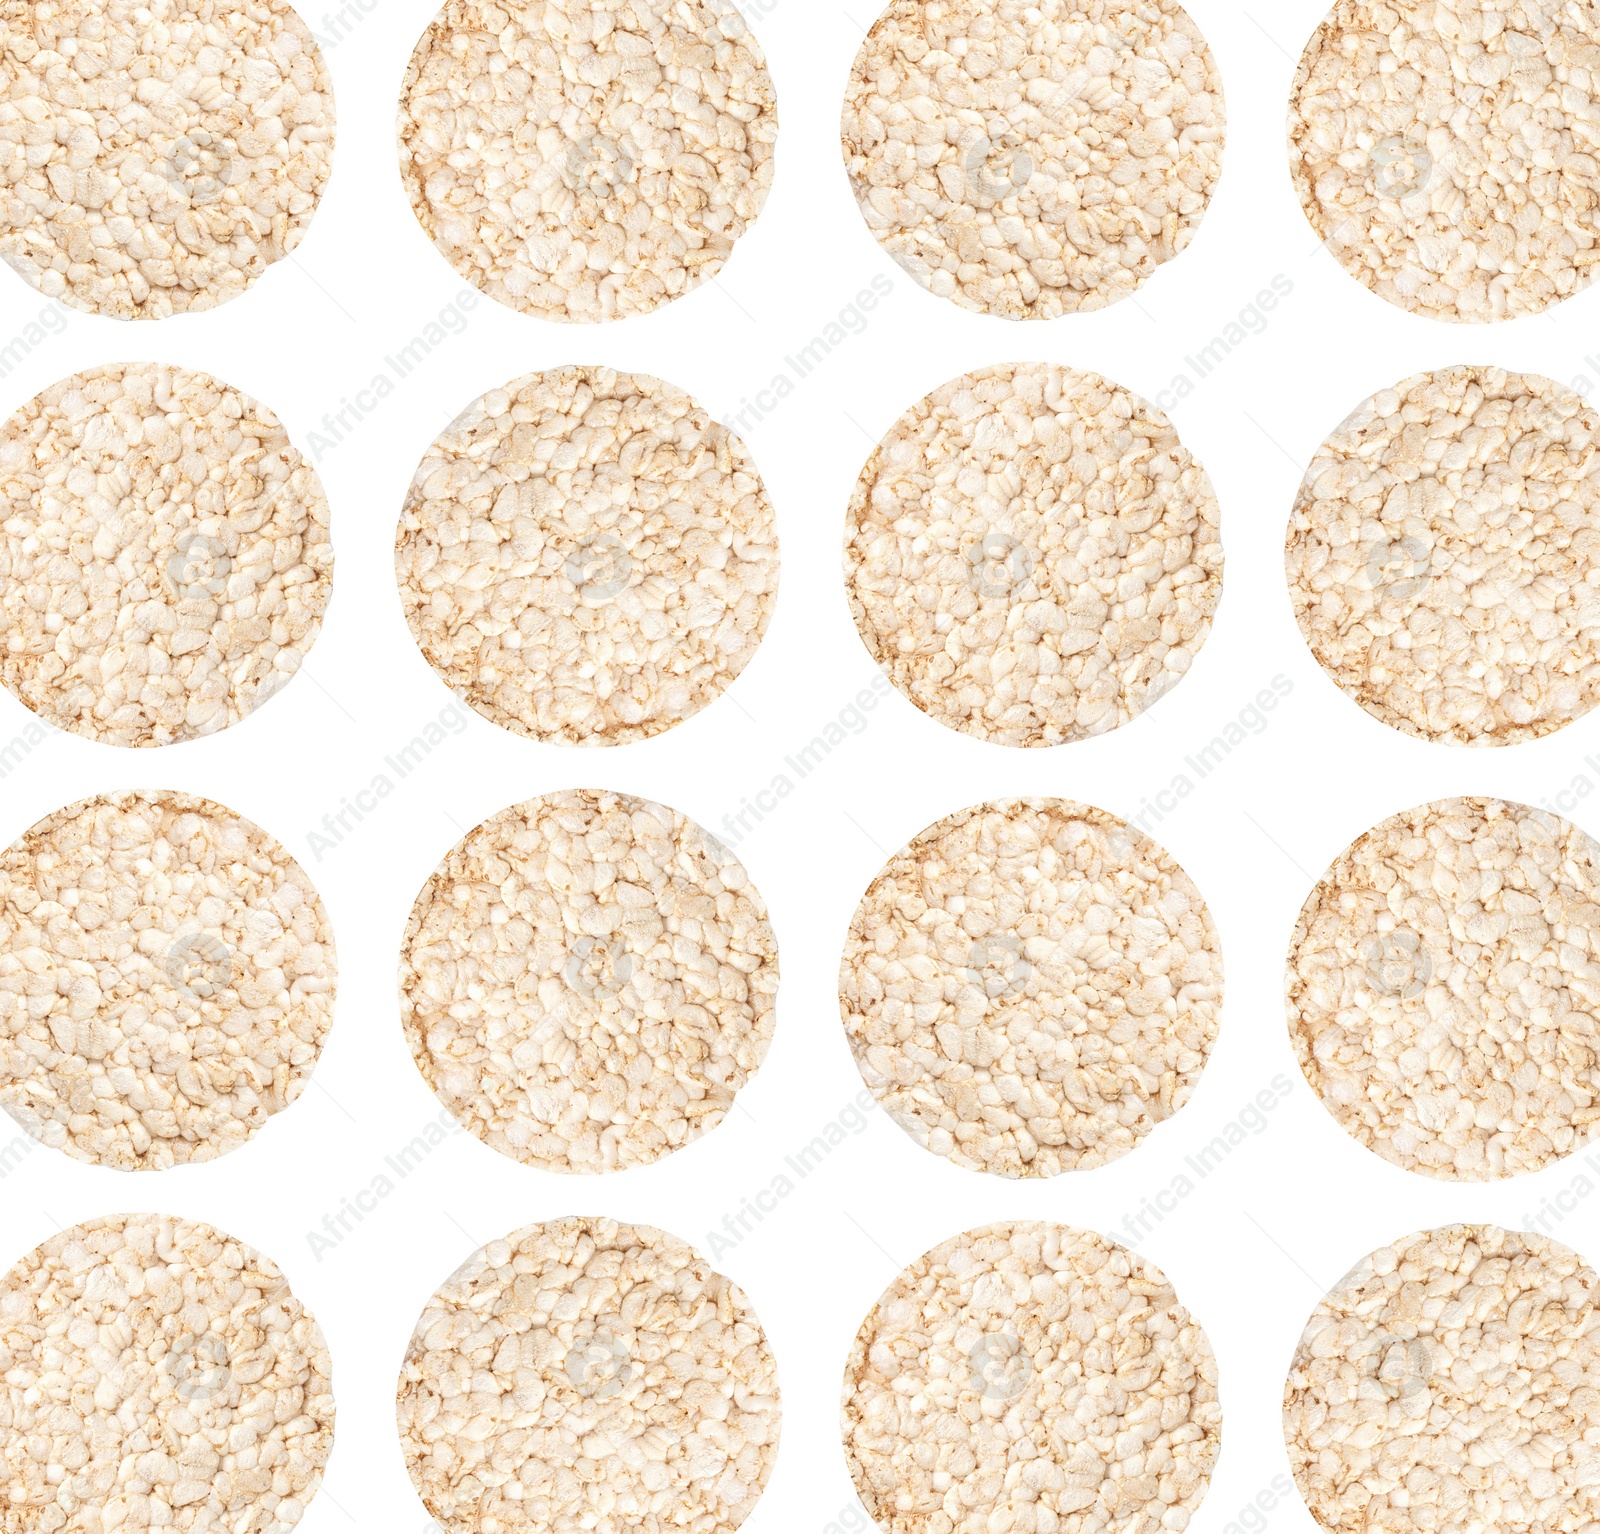 Image of Set of puffed corn cakes on white background. Pattern design